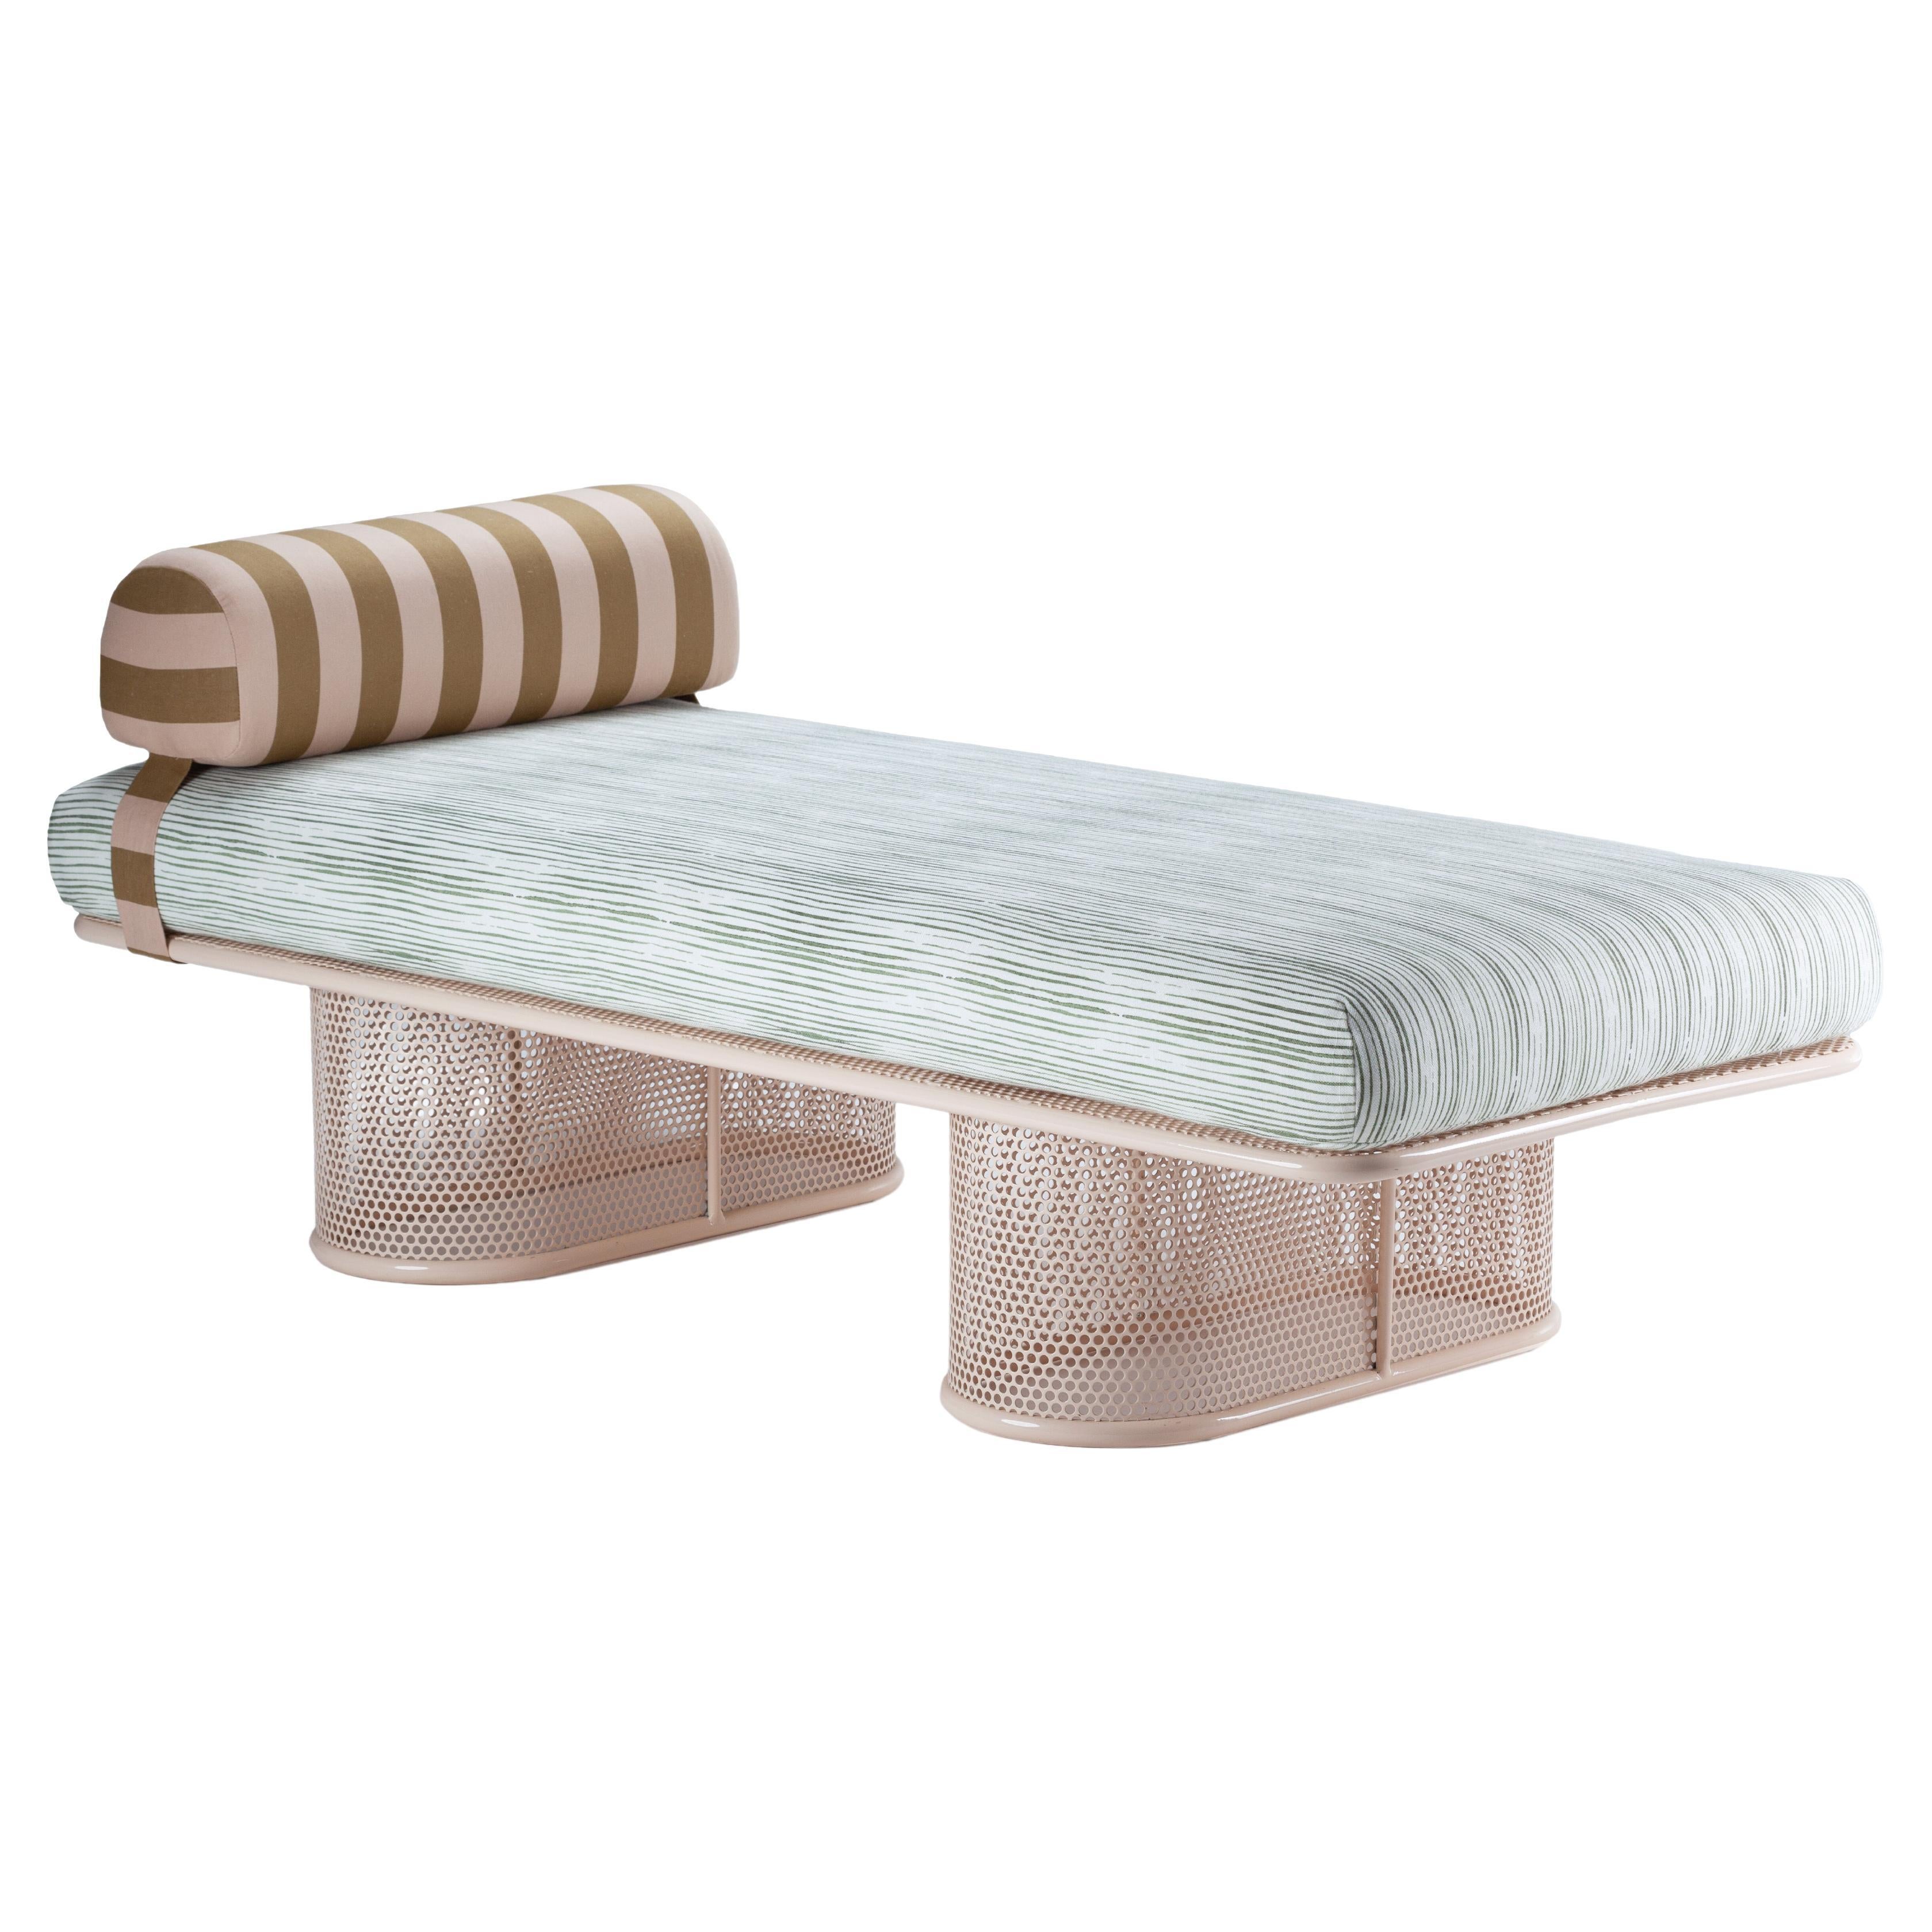 Contemporary Riviera Bench in Lacquered Nude metal & Stripes fabric for Outdoors